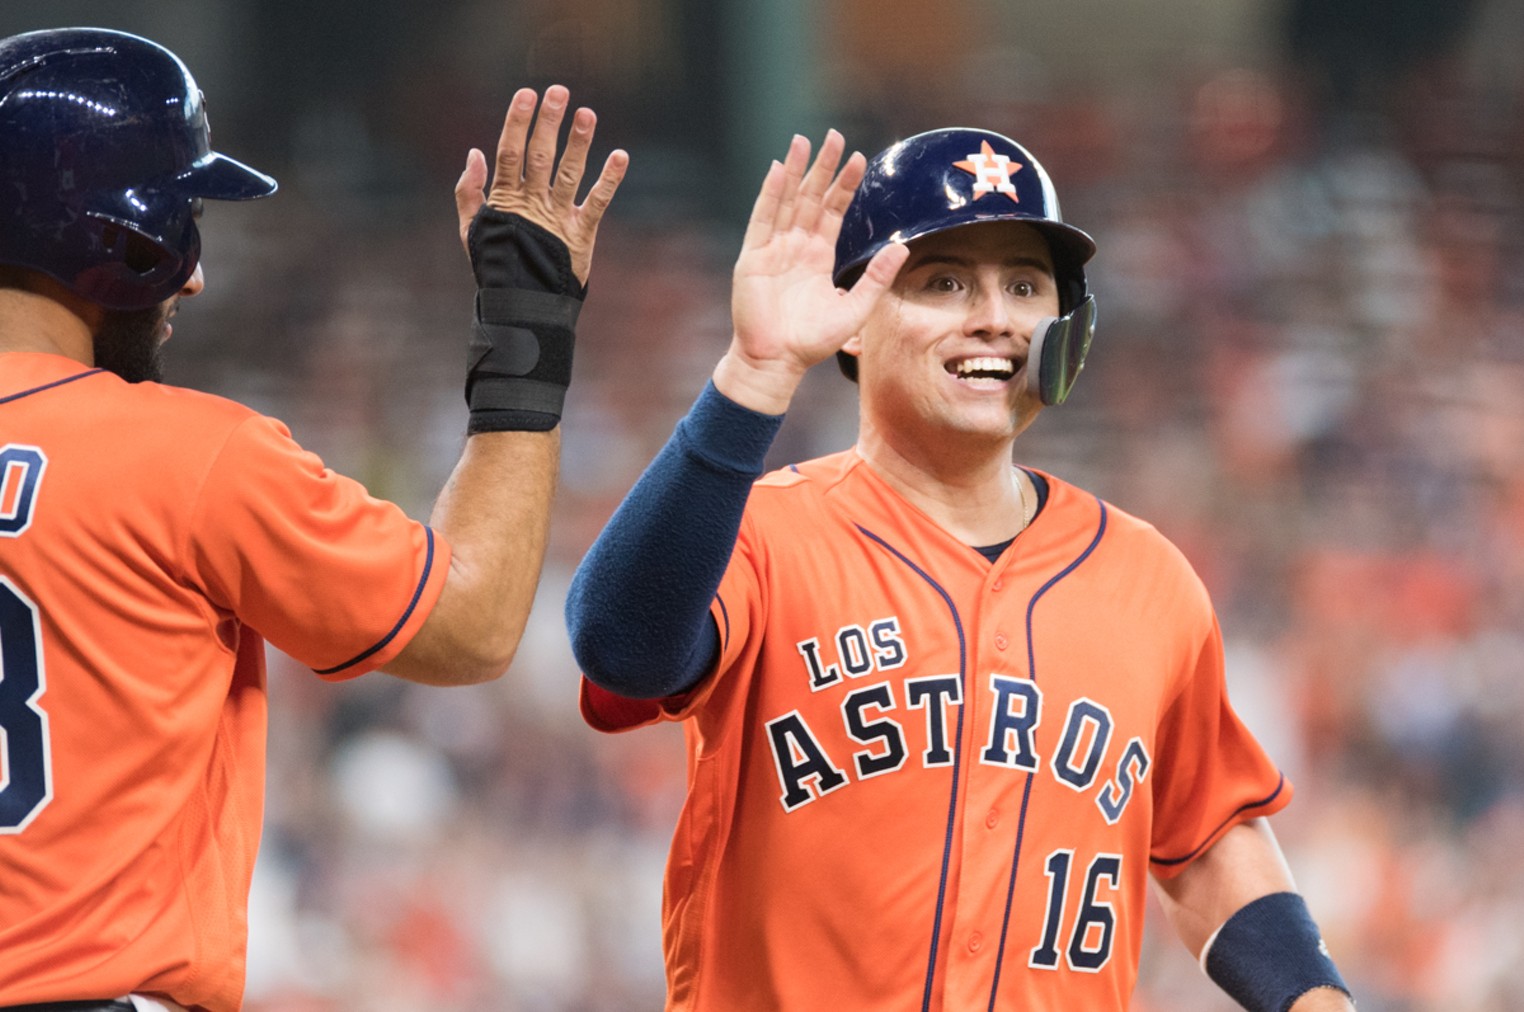 Photo Highlights From the Astros Record Breaking Season